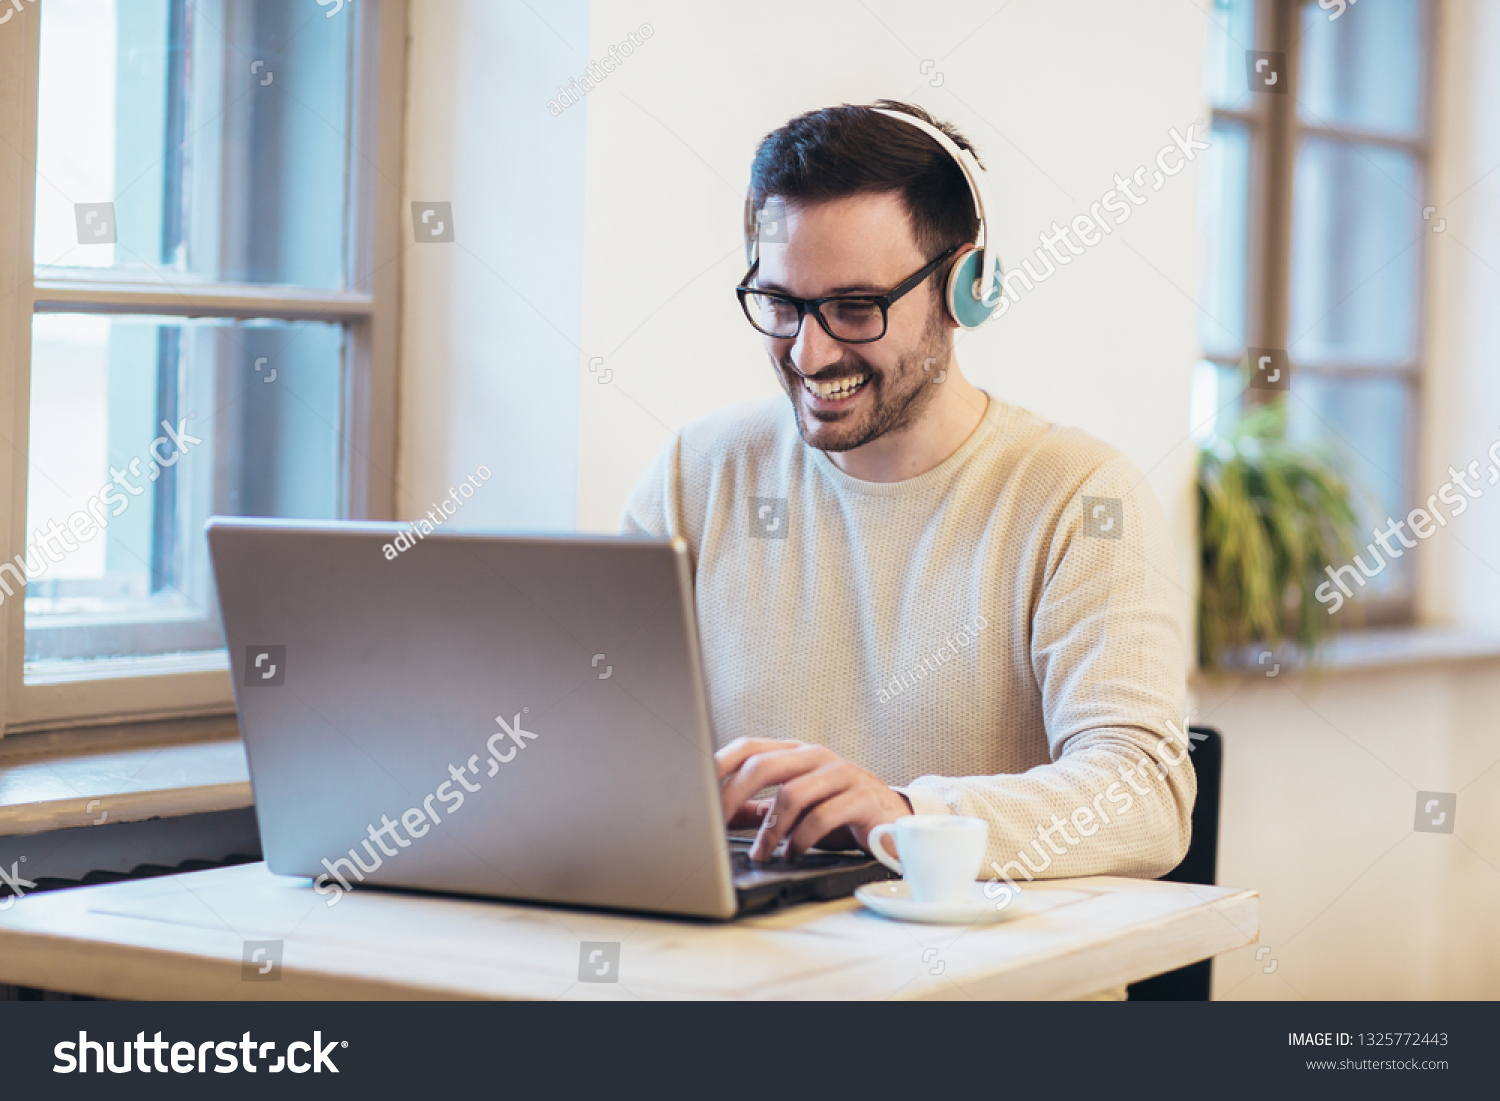 Man in front of laptop computer with headset #1325772443